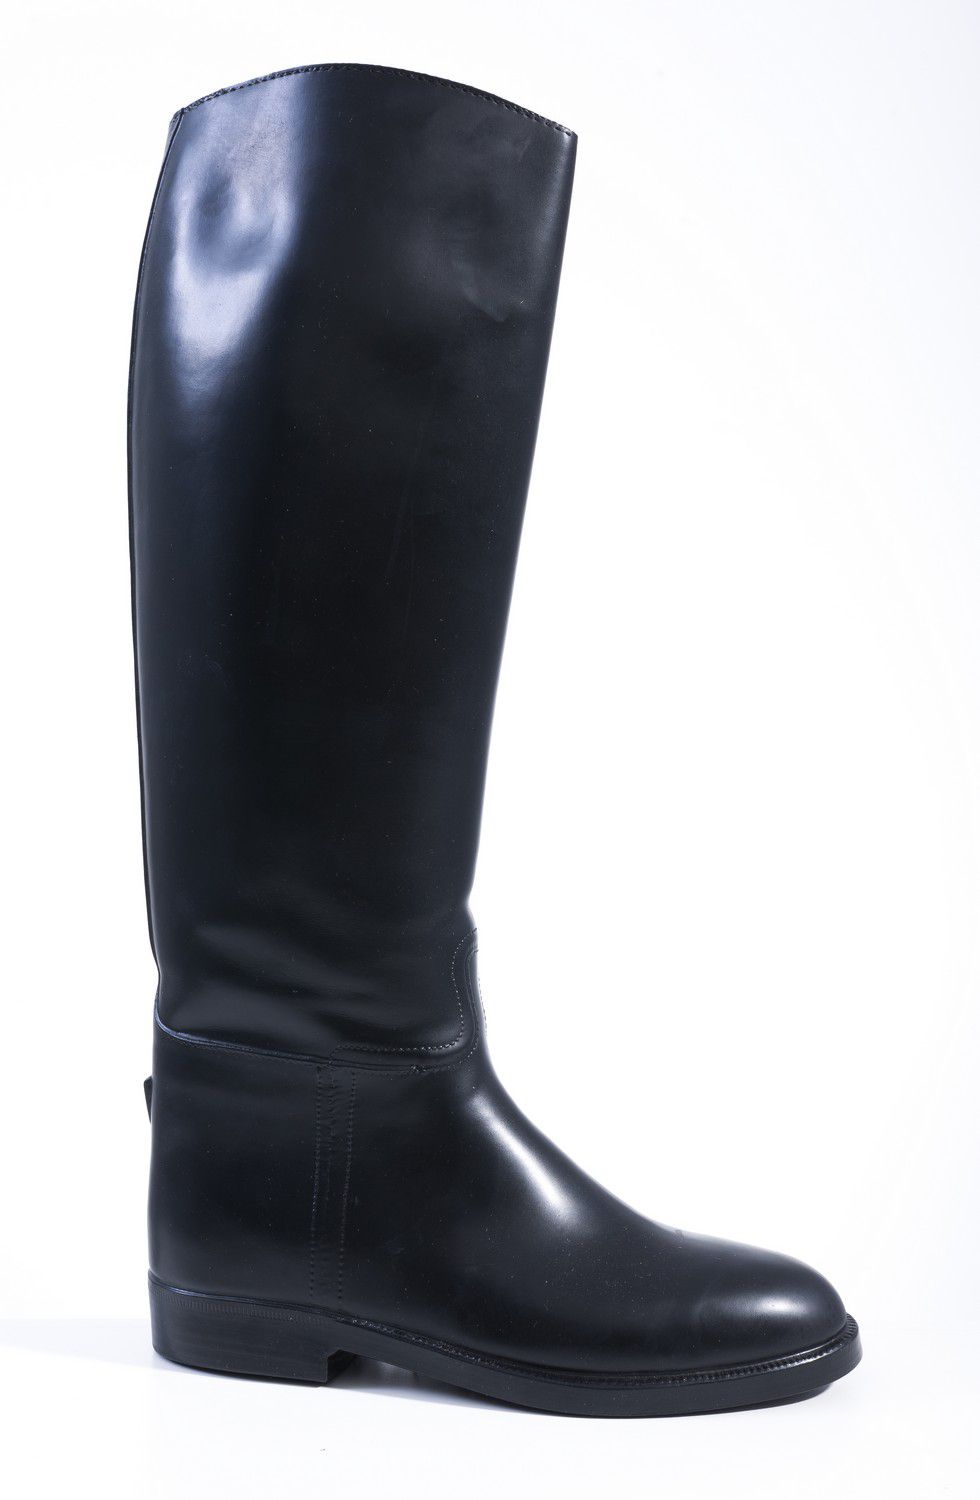 A pair of riding boots by Aigle, styled 